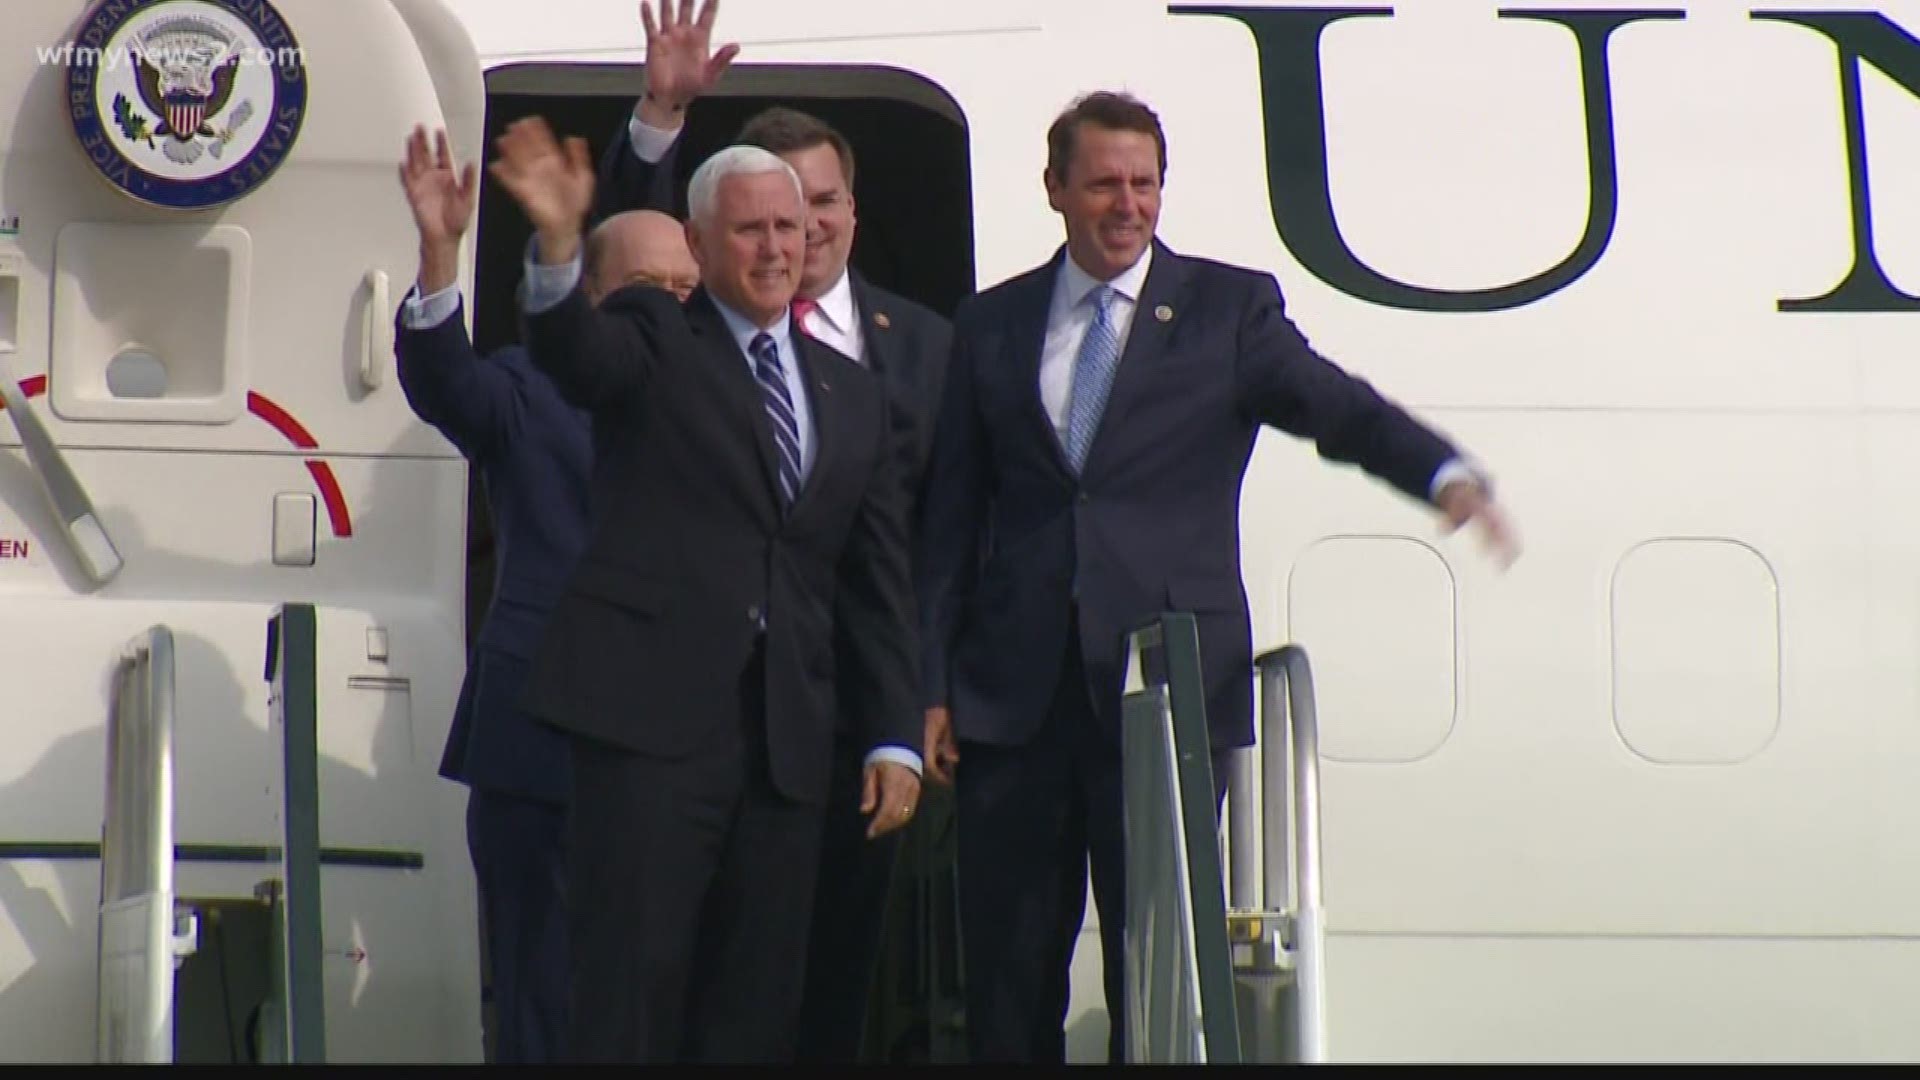 A viewer had questions following the vice president’s visit to Greensboro.